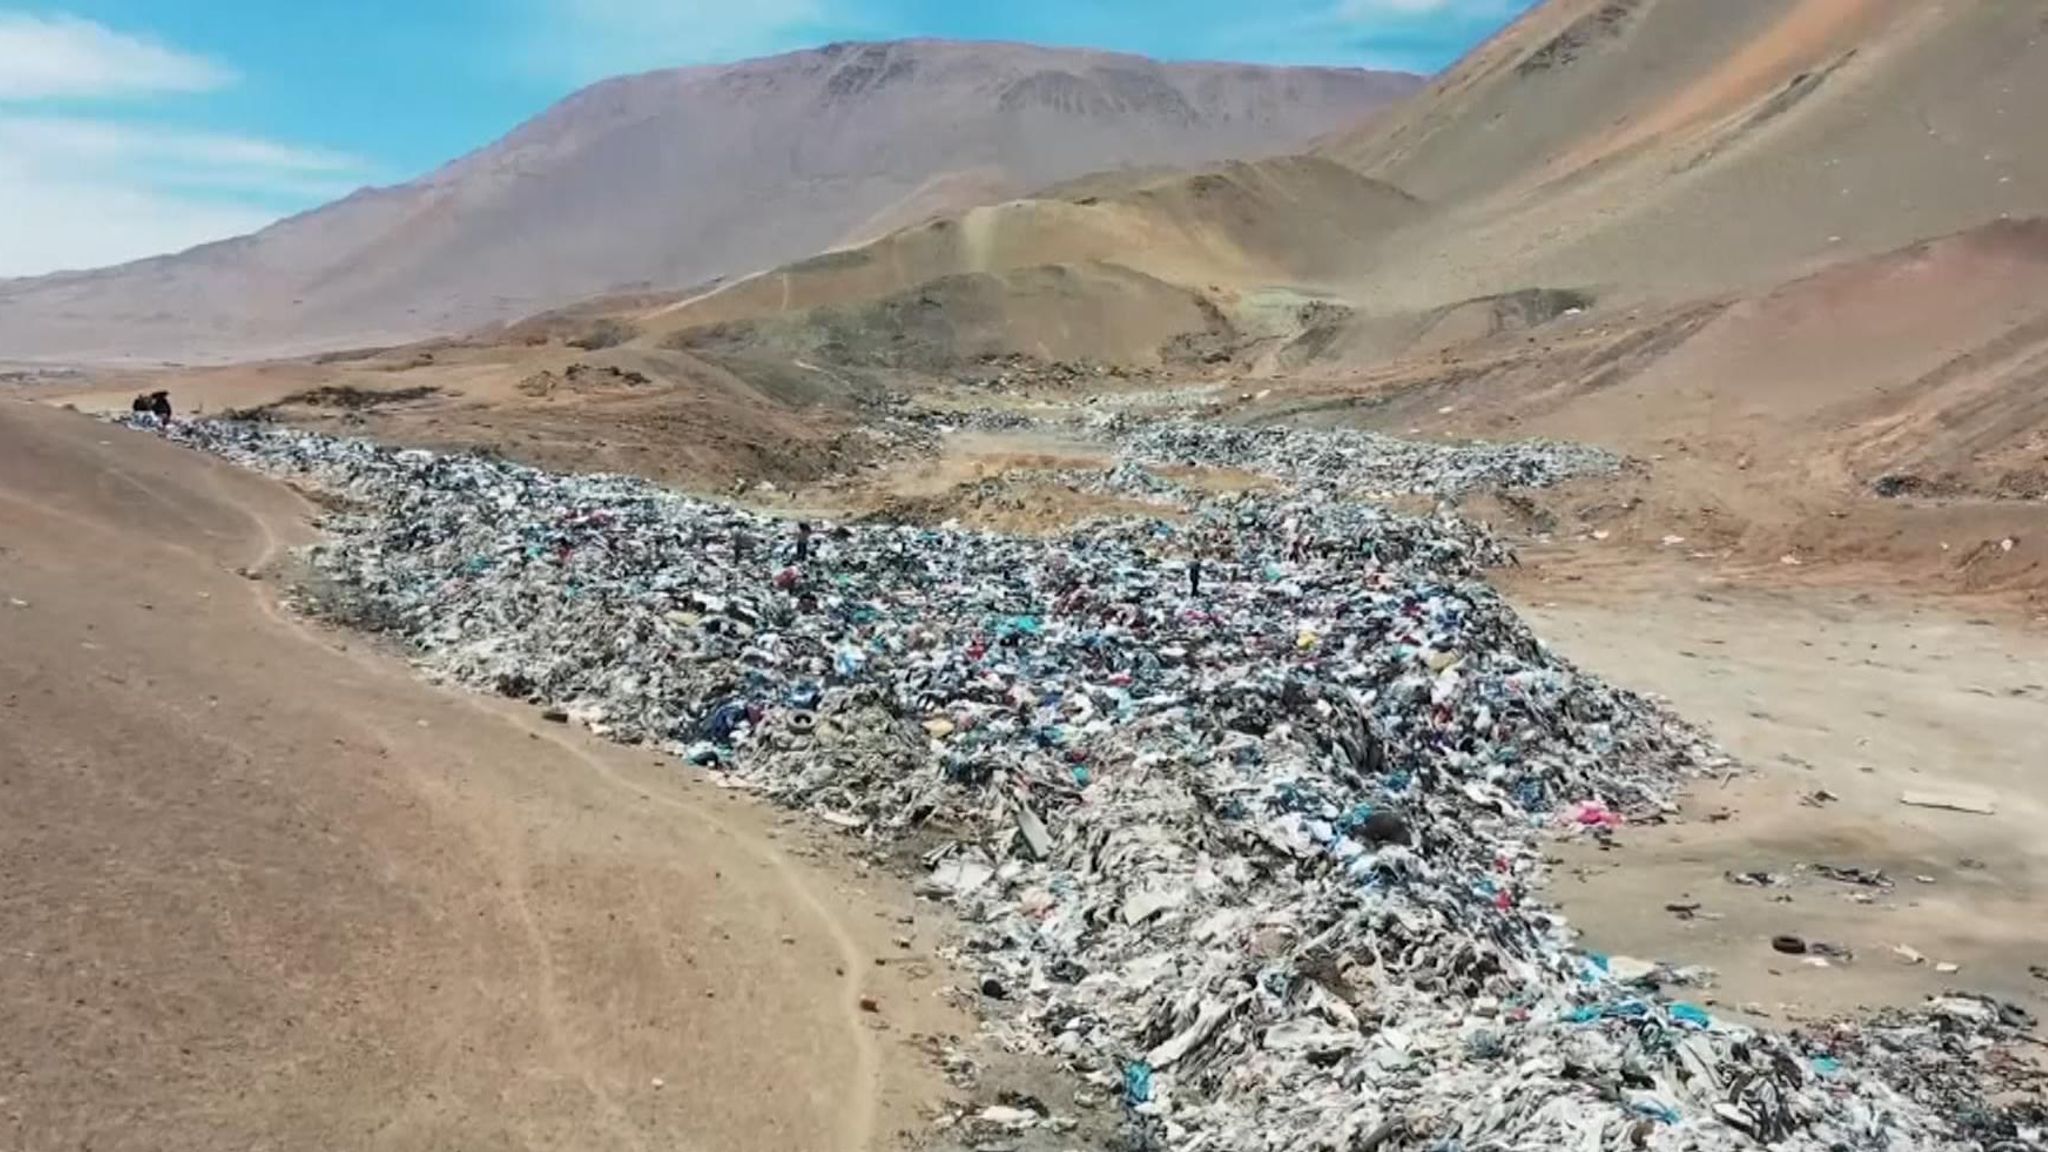 Video: Thousands of tonnes of clothes dumped in Chile's Atacama Desert, World News